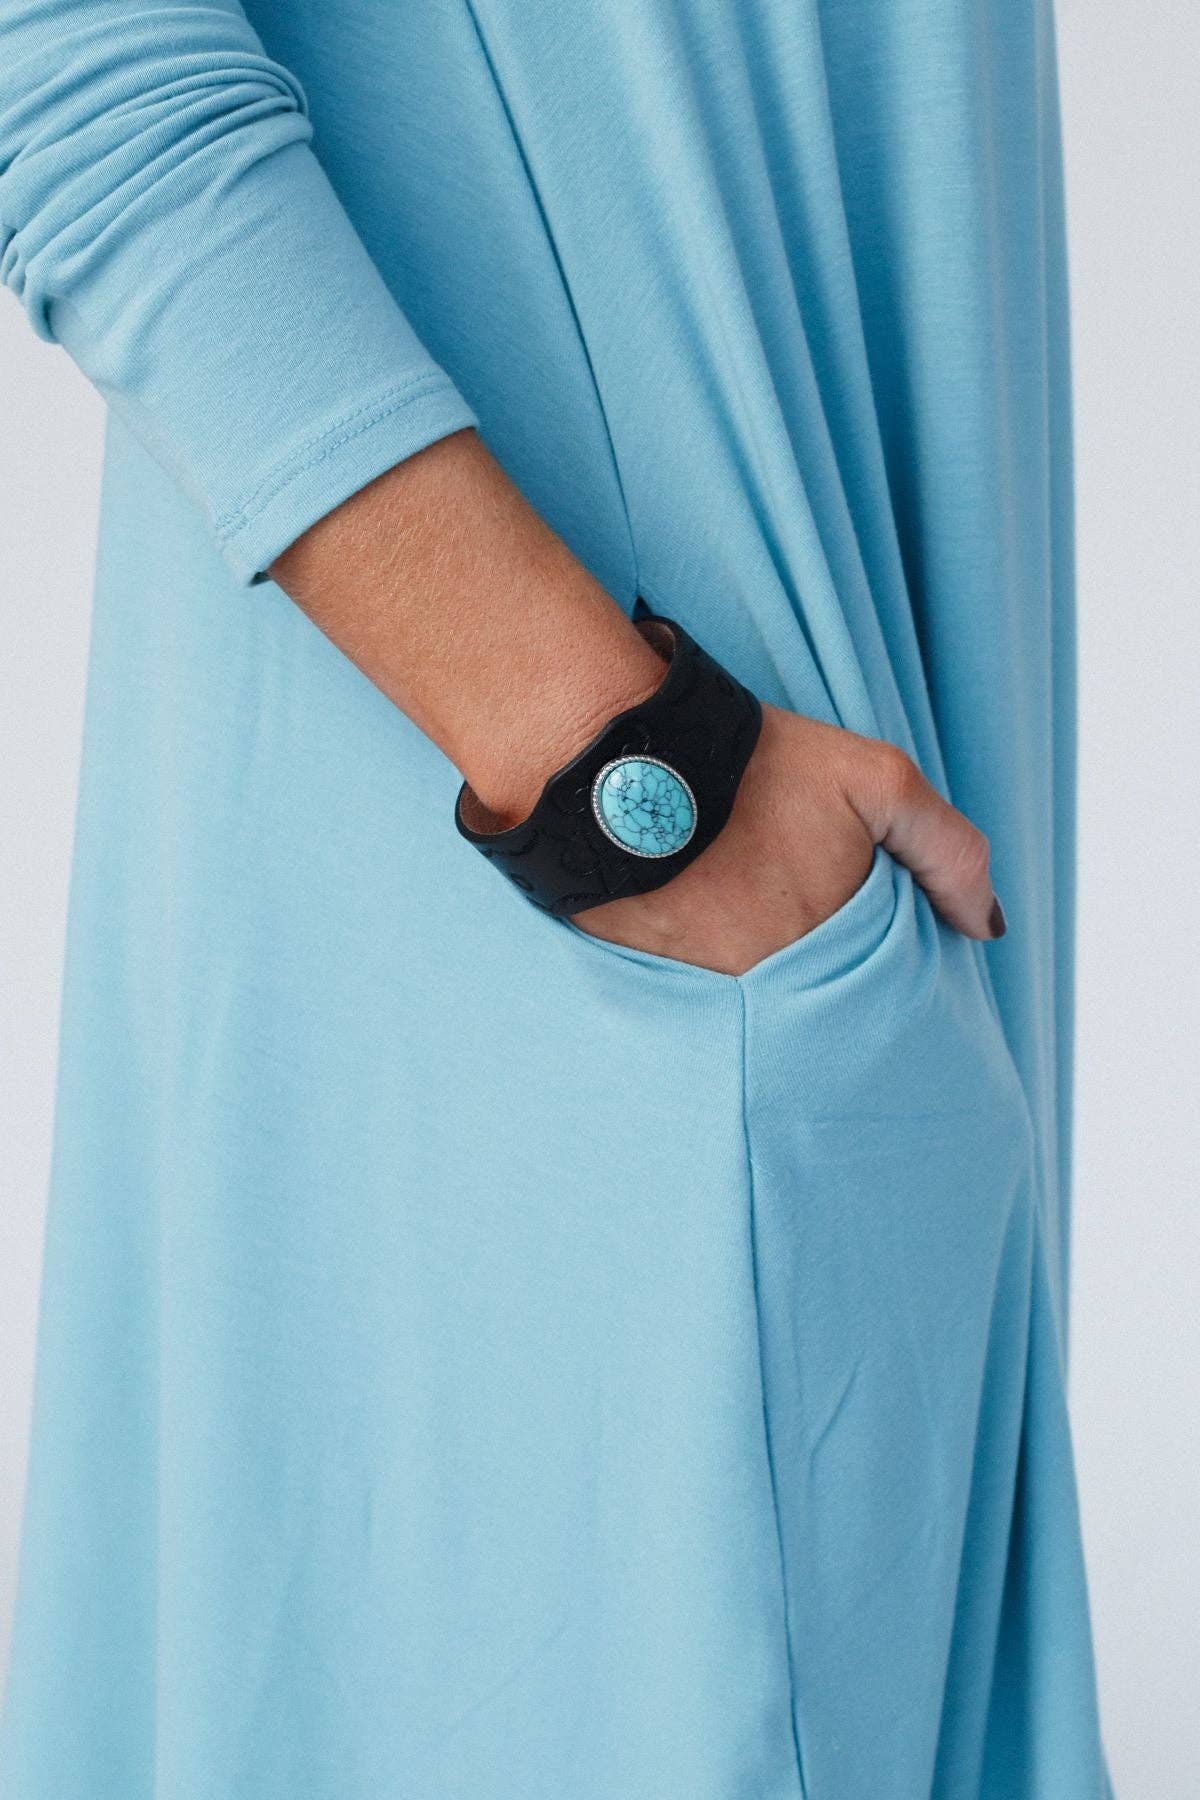 Down The Road Turquoise Cuff - Black